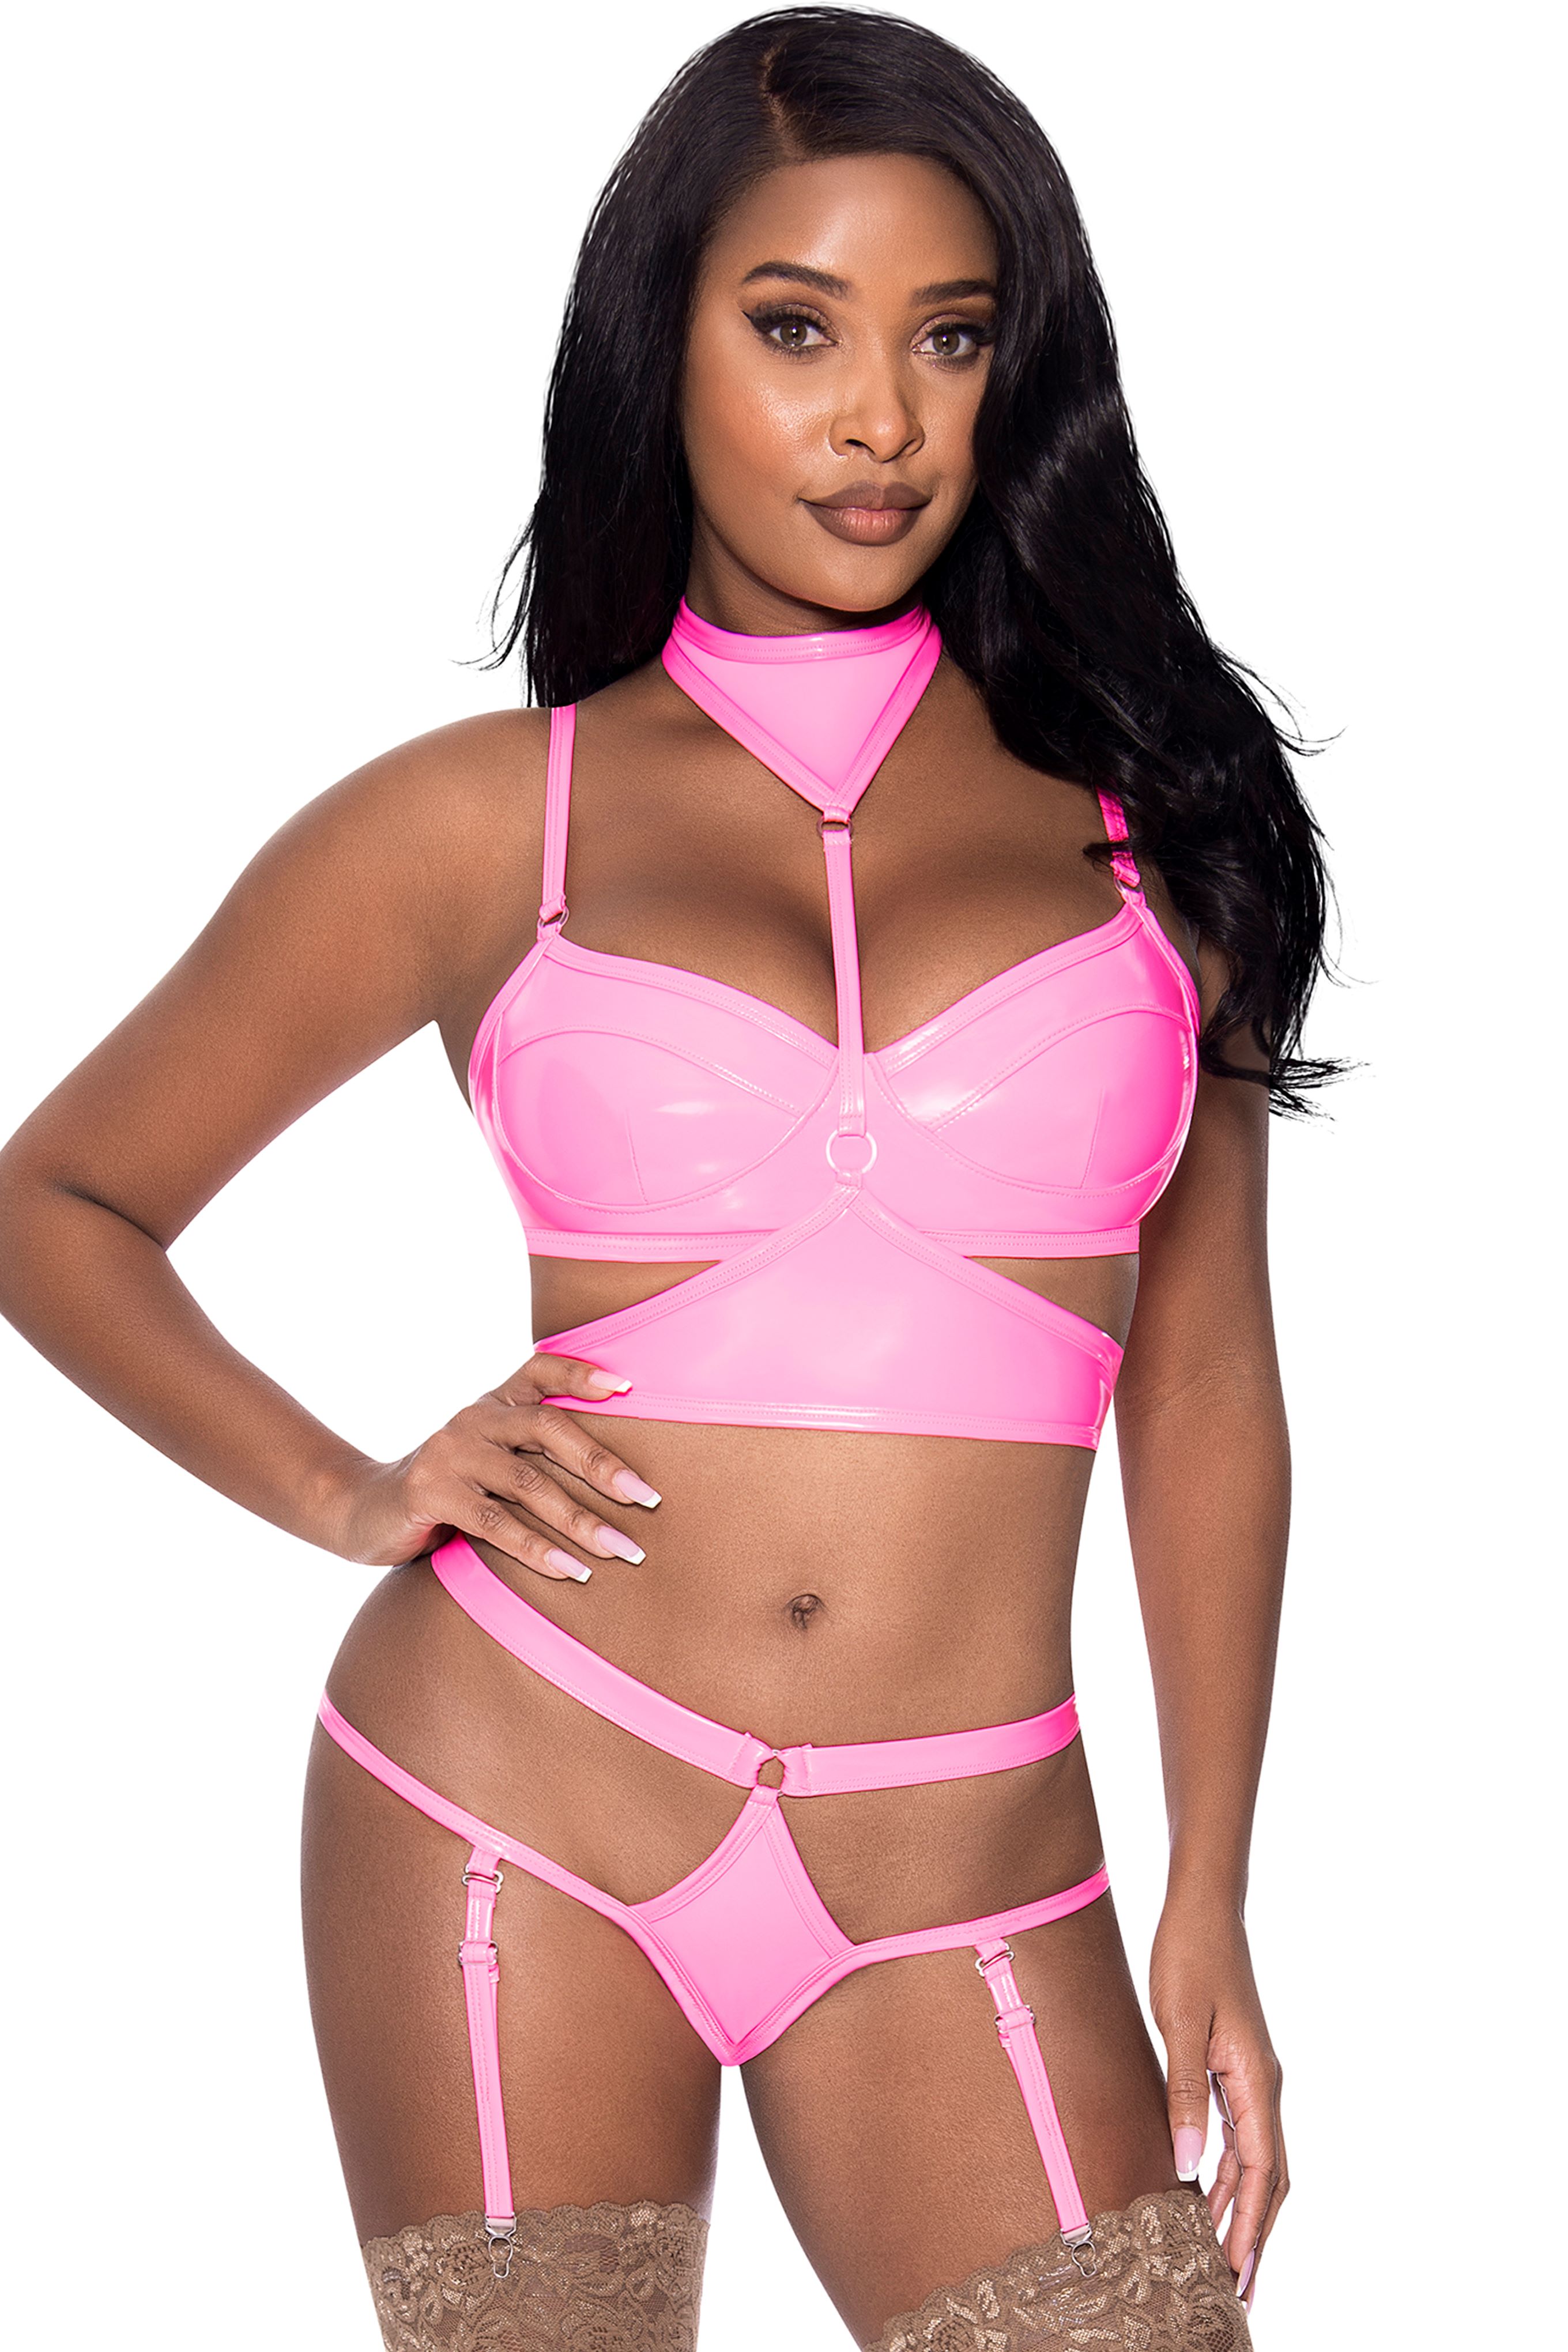 CLUB CANDY BRA HARNESS & PANTY PINK L/XL - Click Image to Close